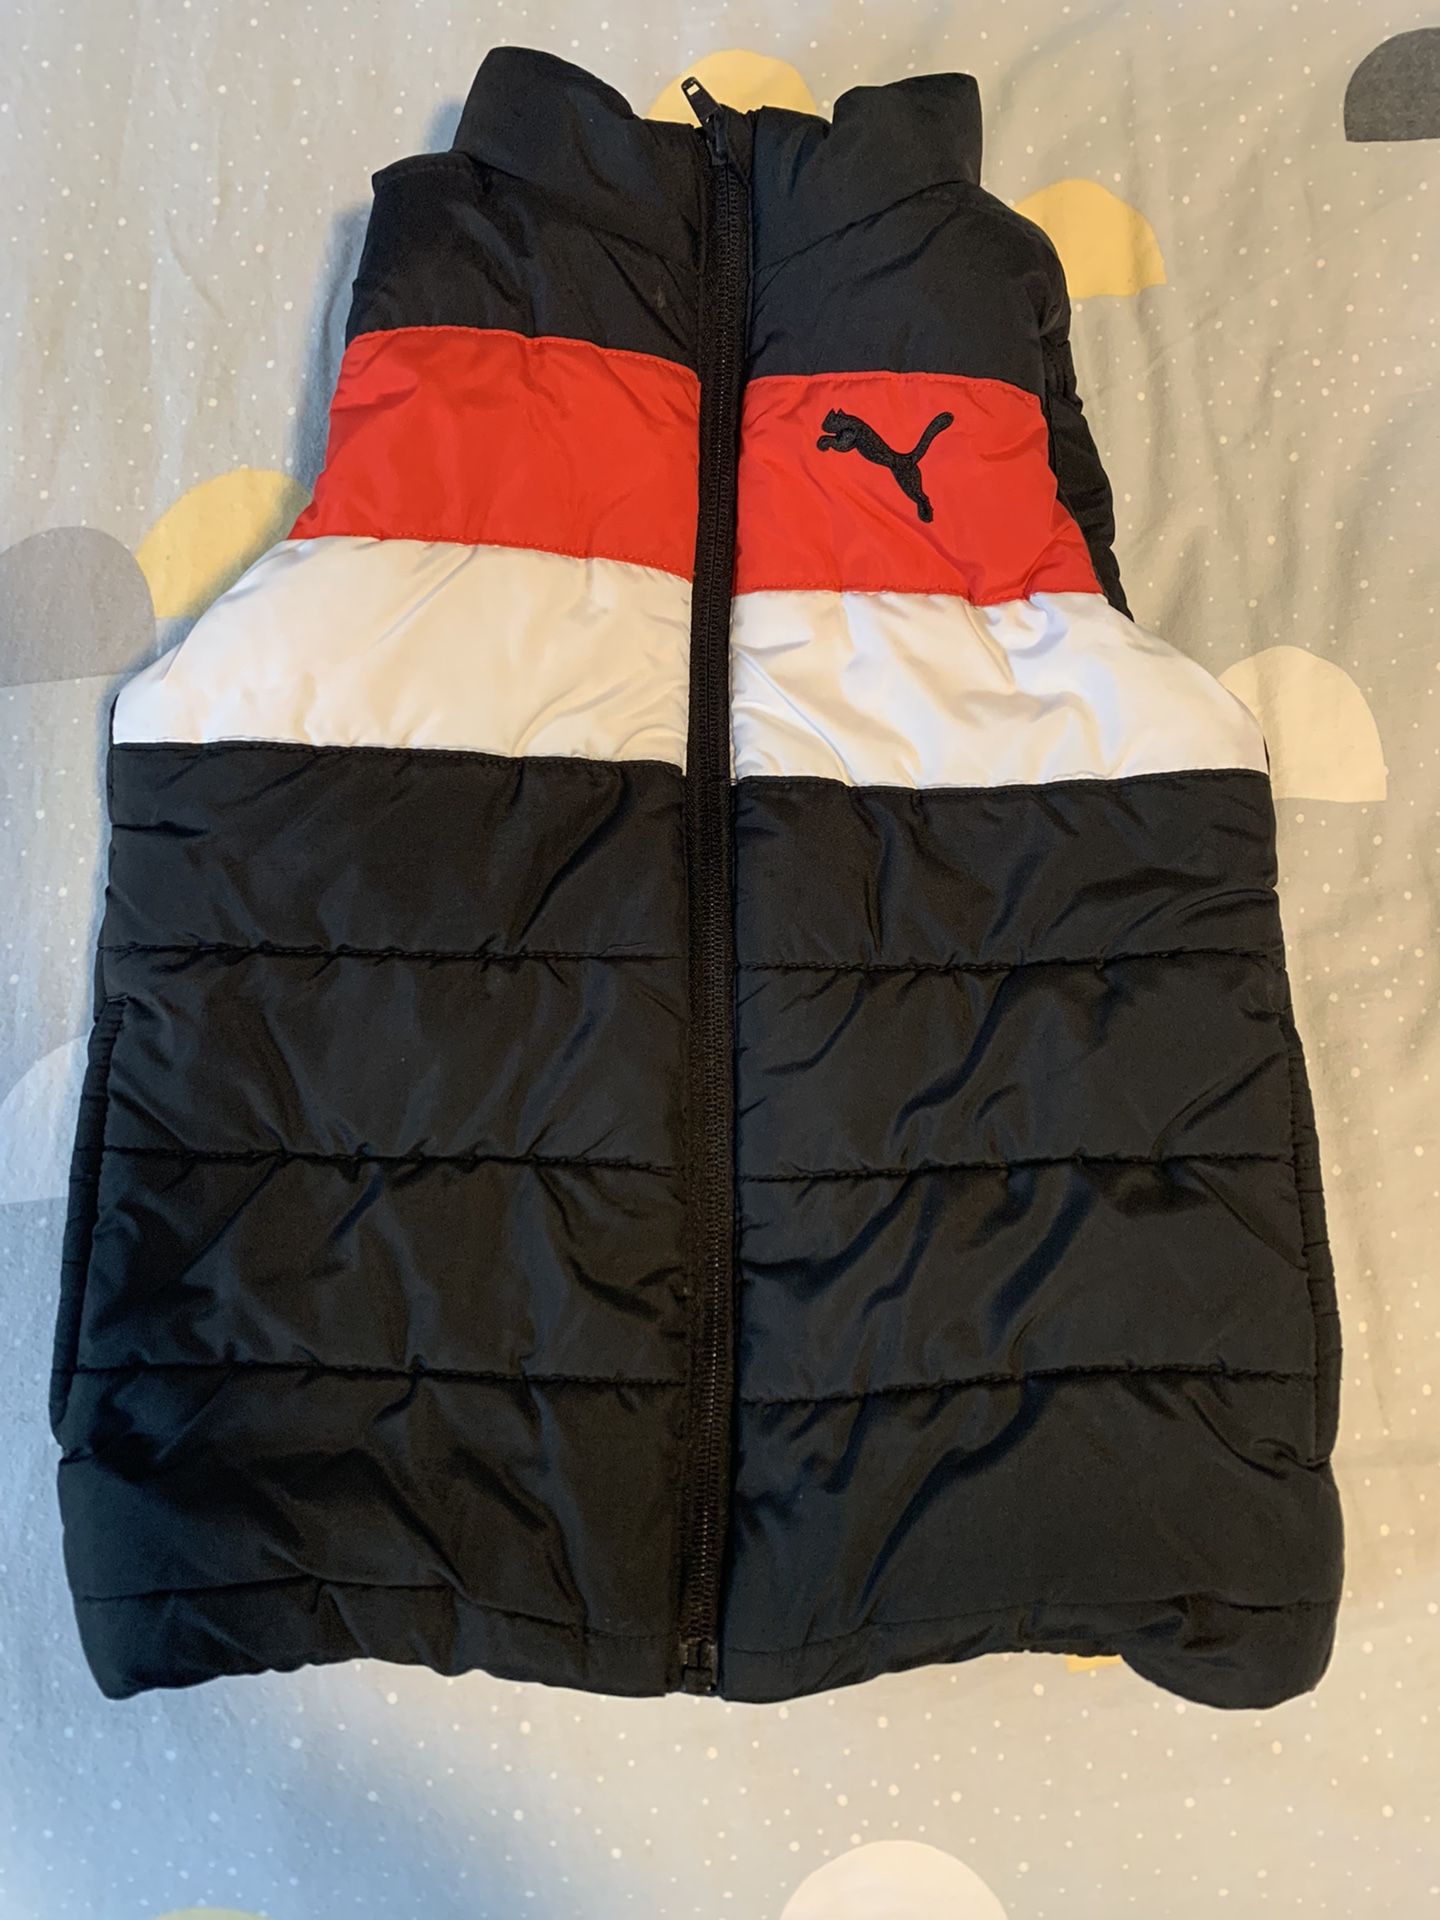 PUMA puffer vest for 5-6 years old boy or girl